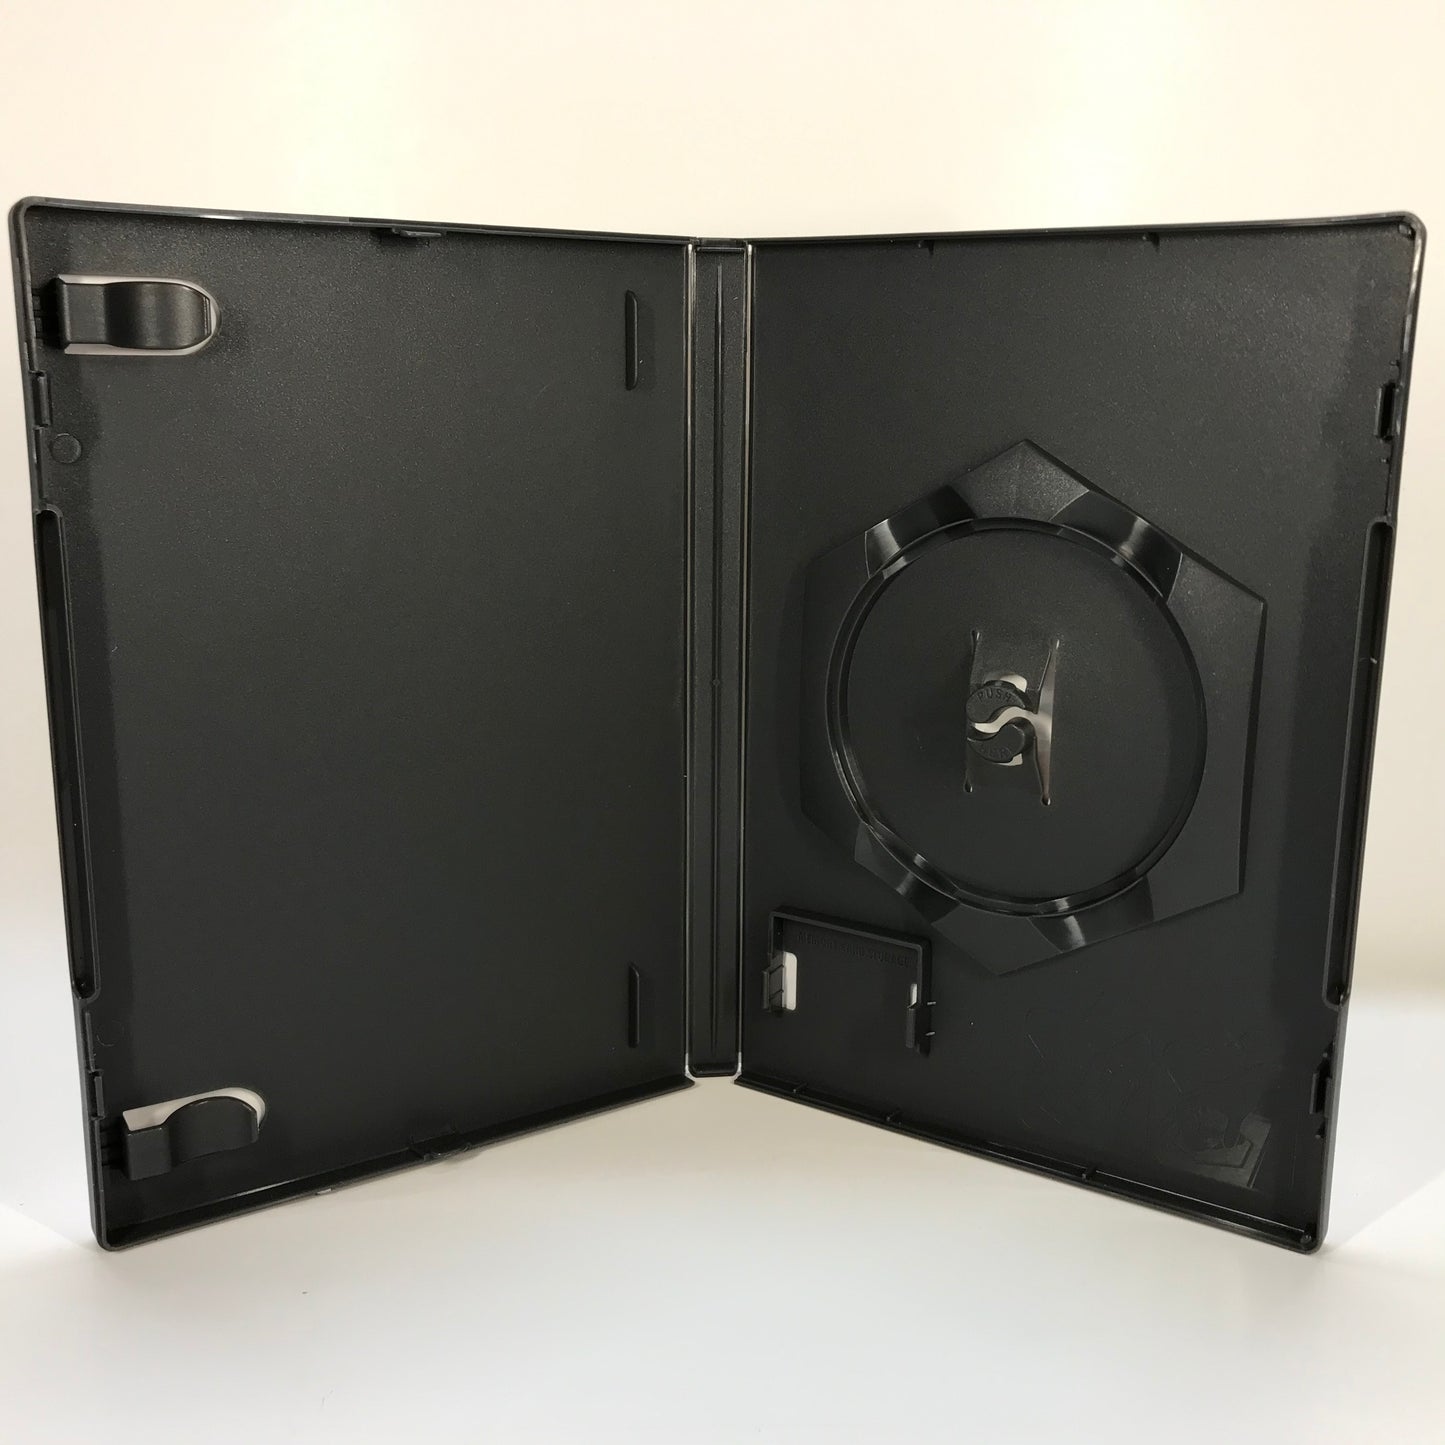 GameCube Replacement Case - NO GAME - Metal Gear Solid - The Twin Snakes